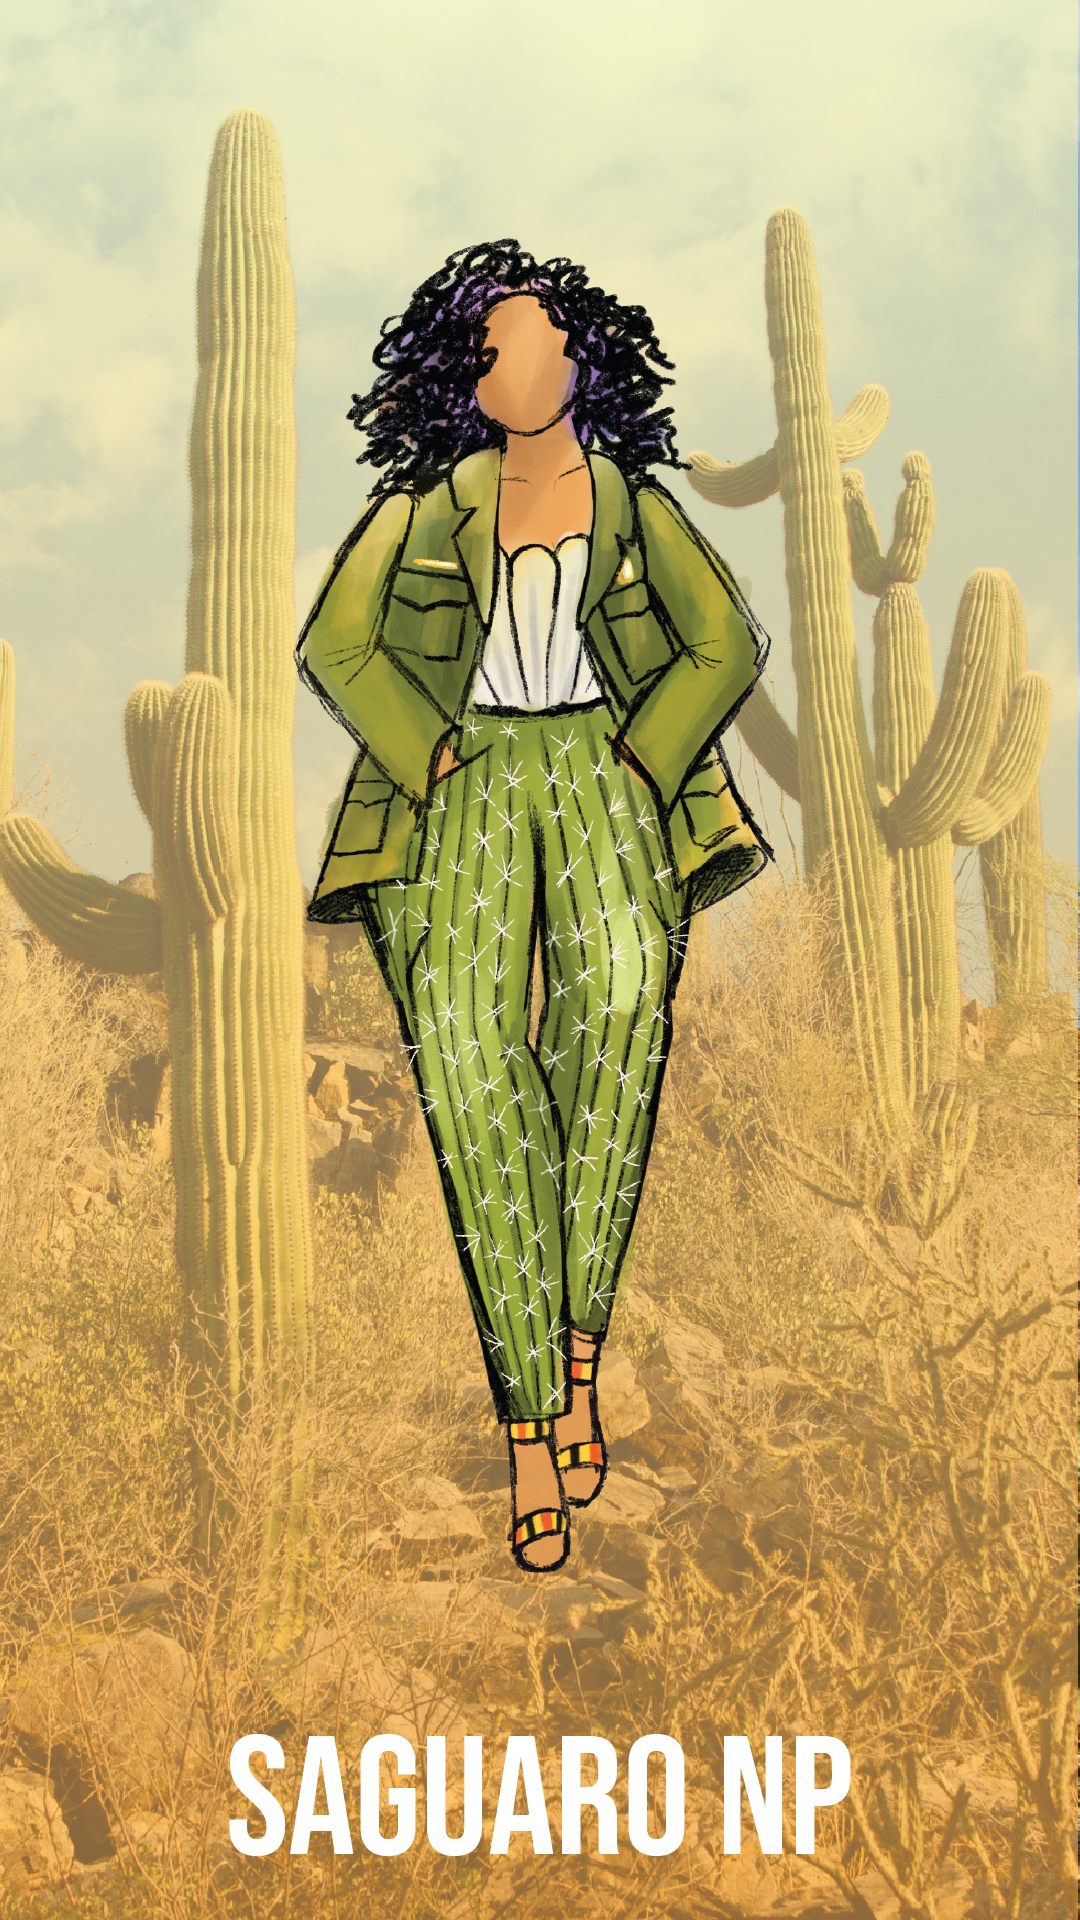 A fashion sketch with a female model wearing cacti-inspired pants and a green jacket against a faded desert scene